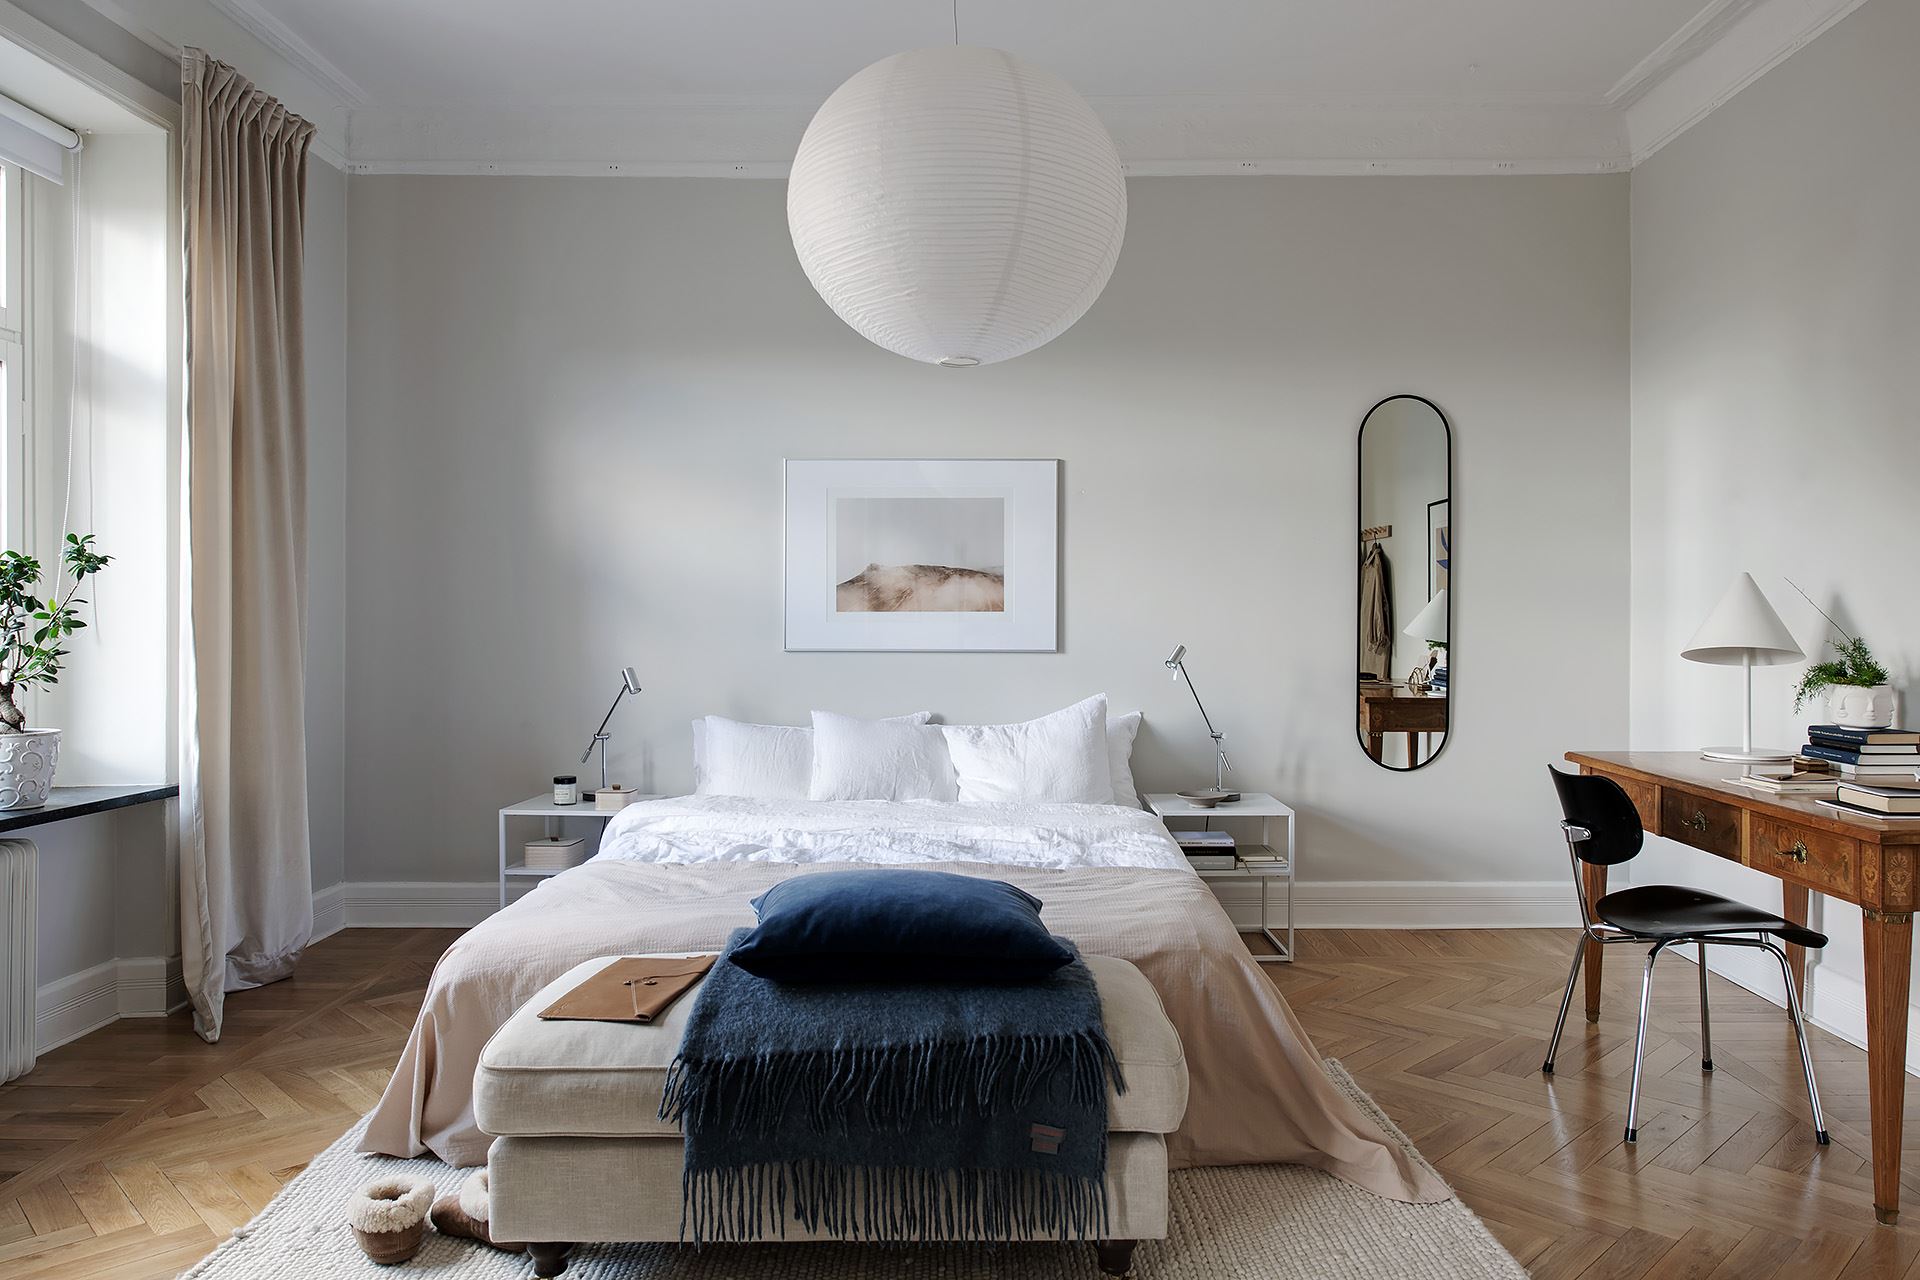 20 calming and tranquil light grey bedroom ideas - COCO LAPINE DESIGN